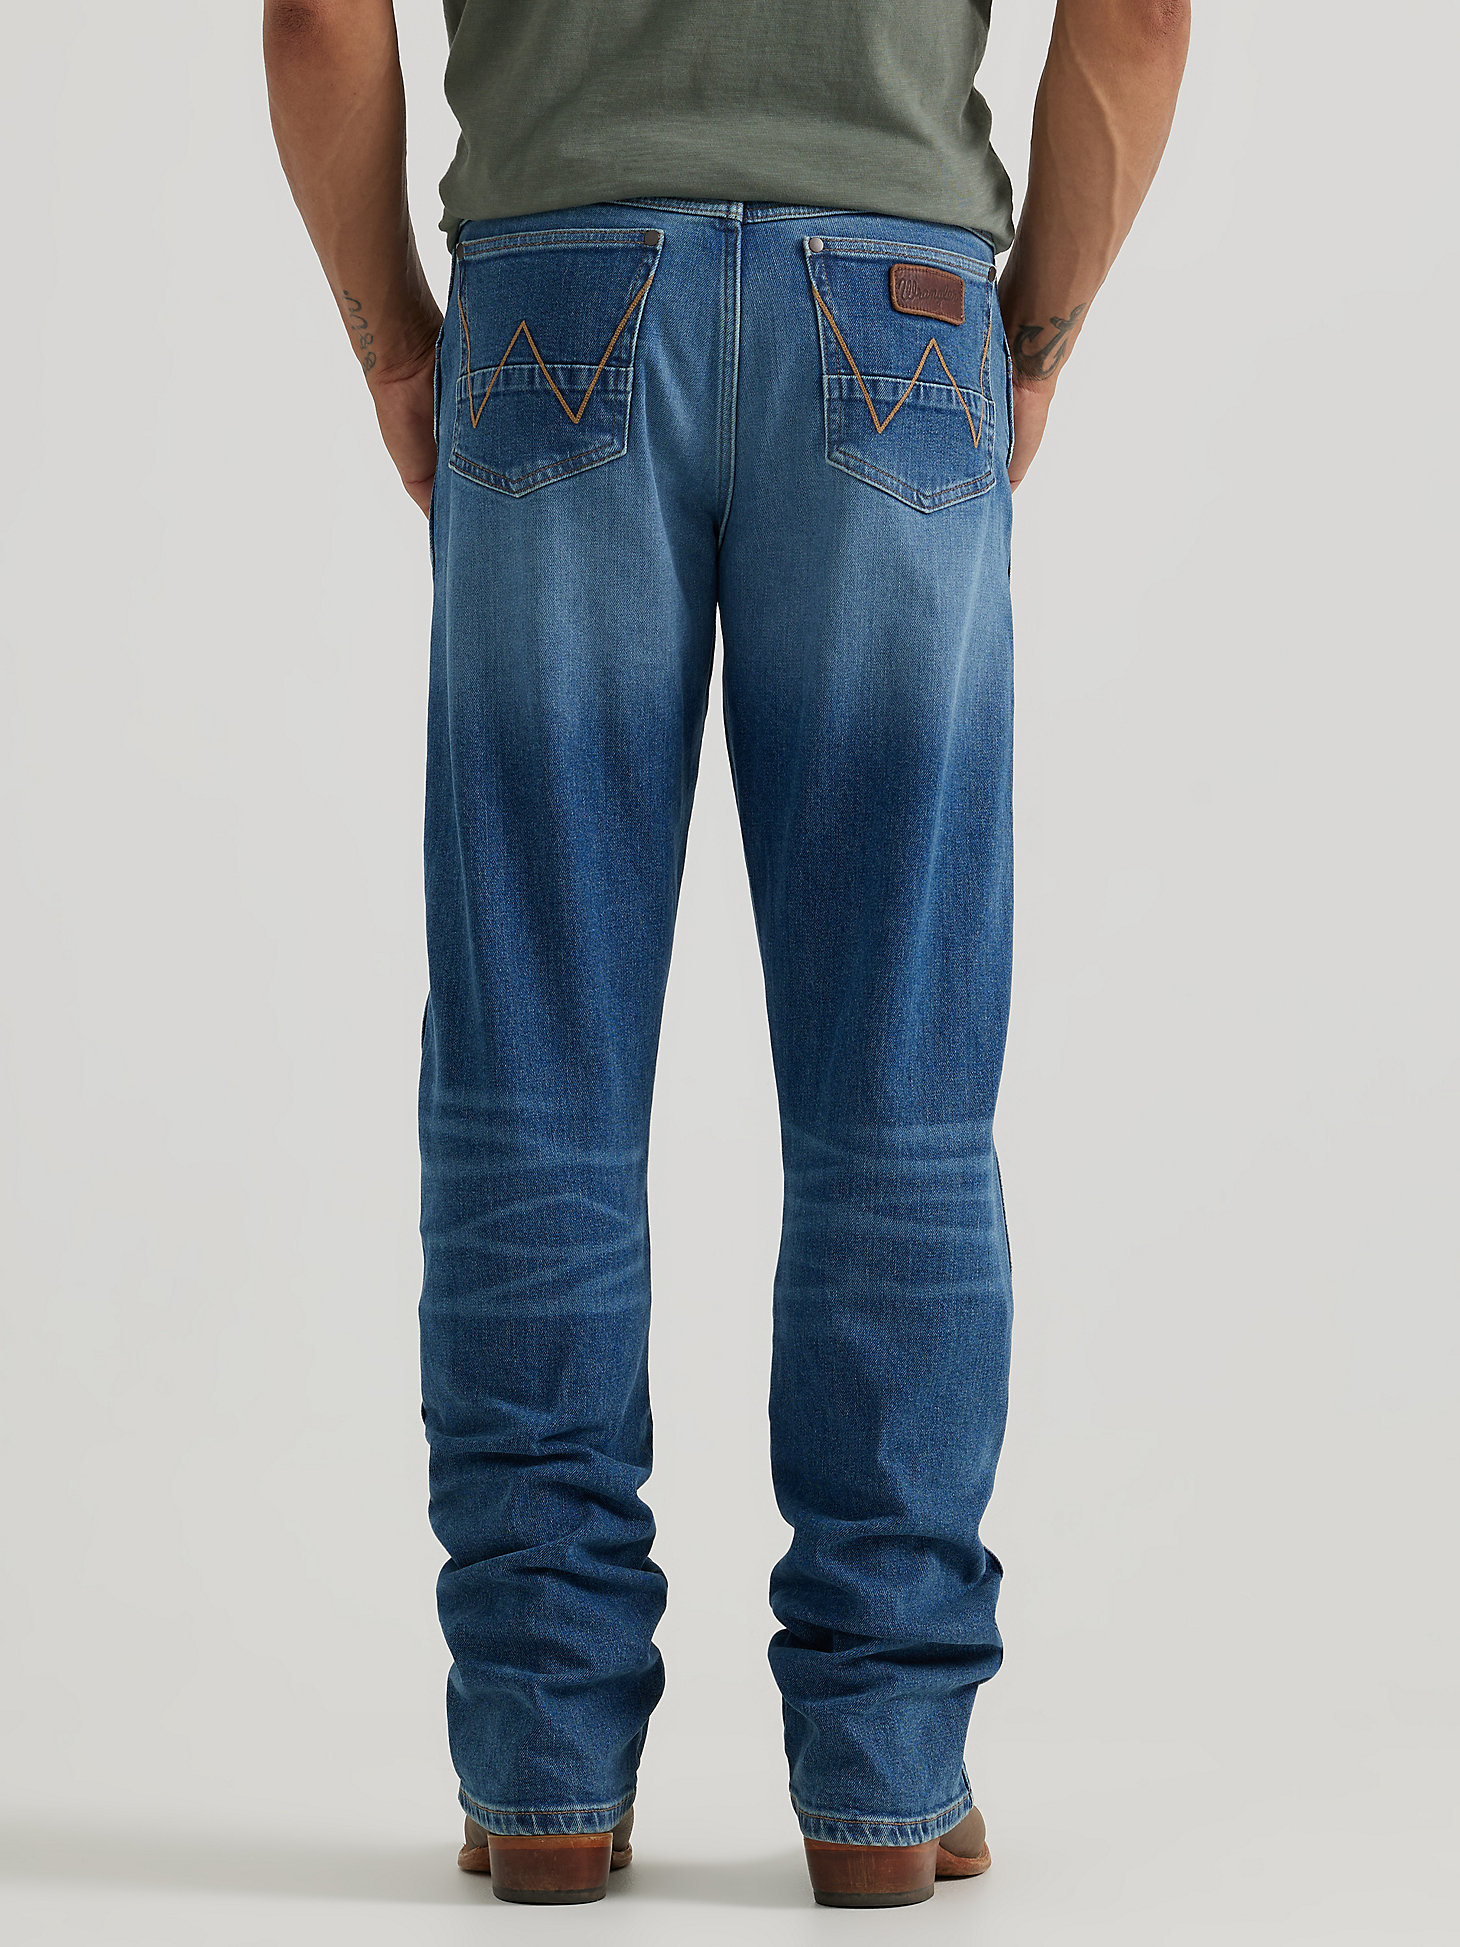 Men's Wrangler Retro® Relaxed Fit Bootcut Jean in Andalusian alternative view 2